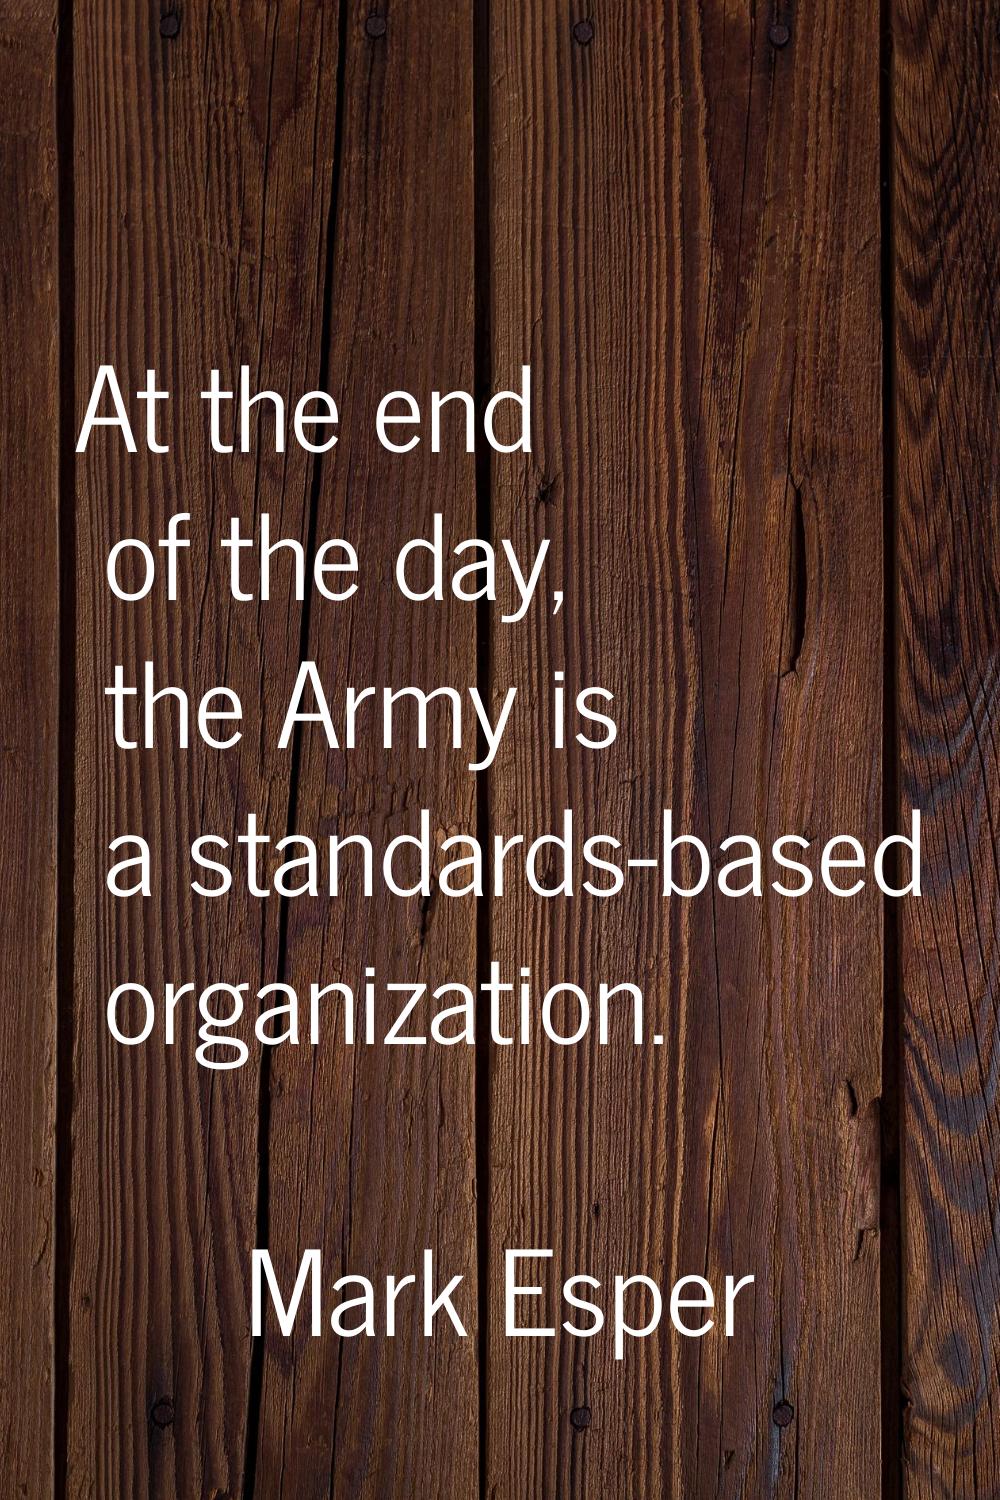 At the end of the day, the Army is a standards-based organization.